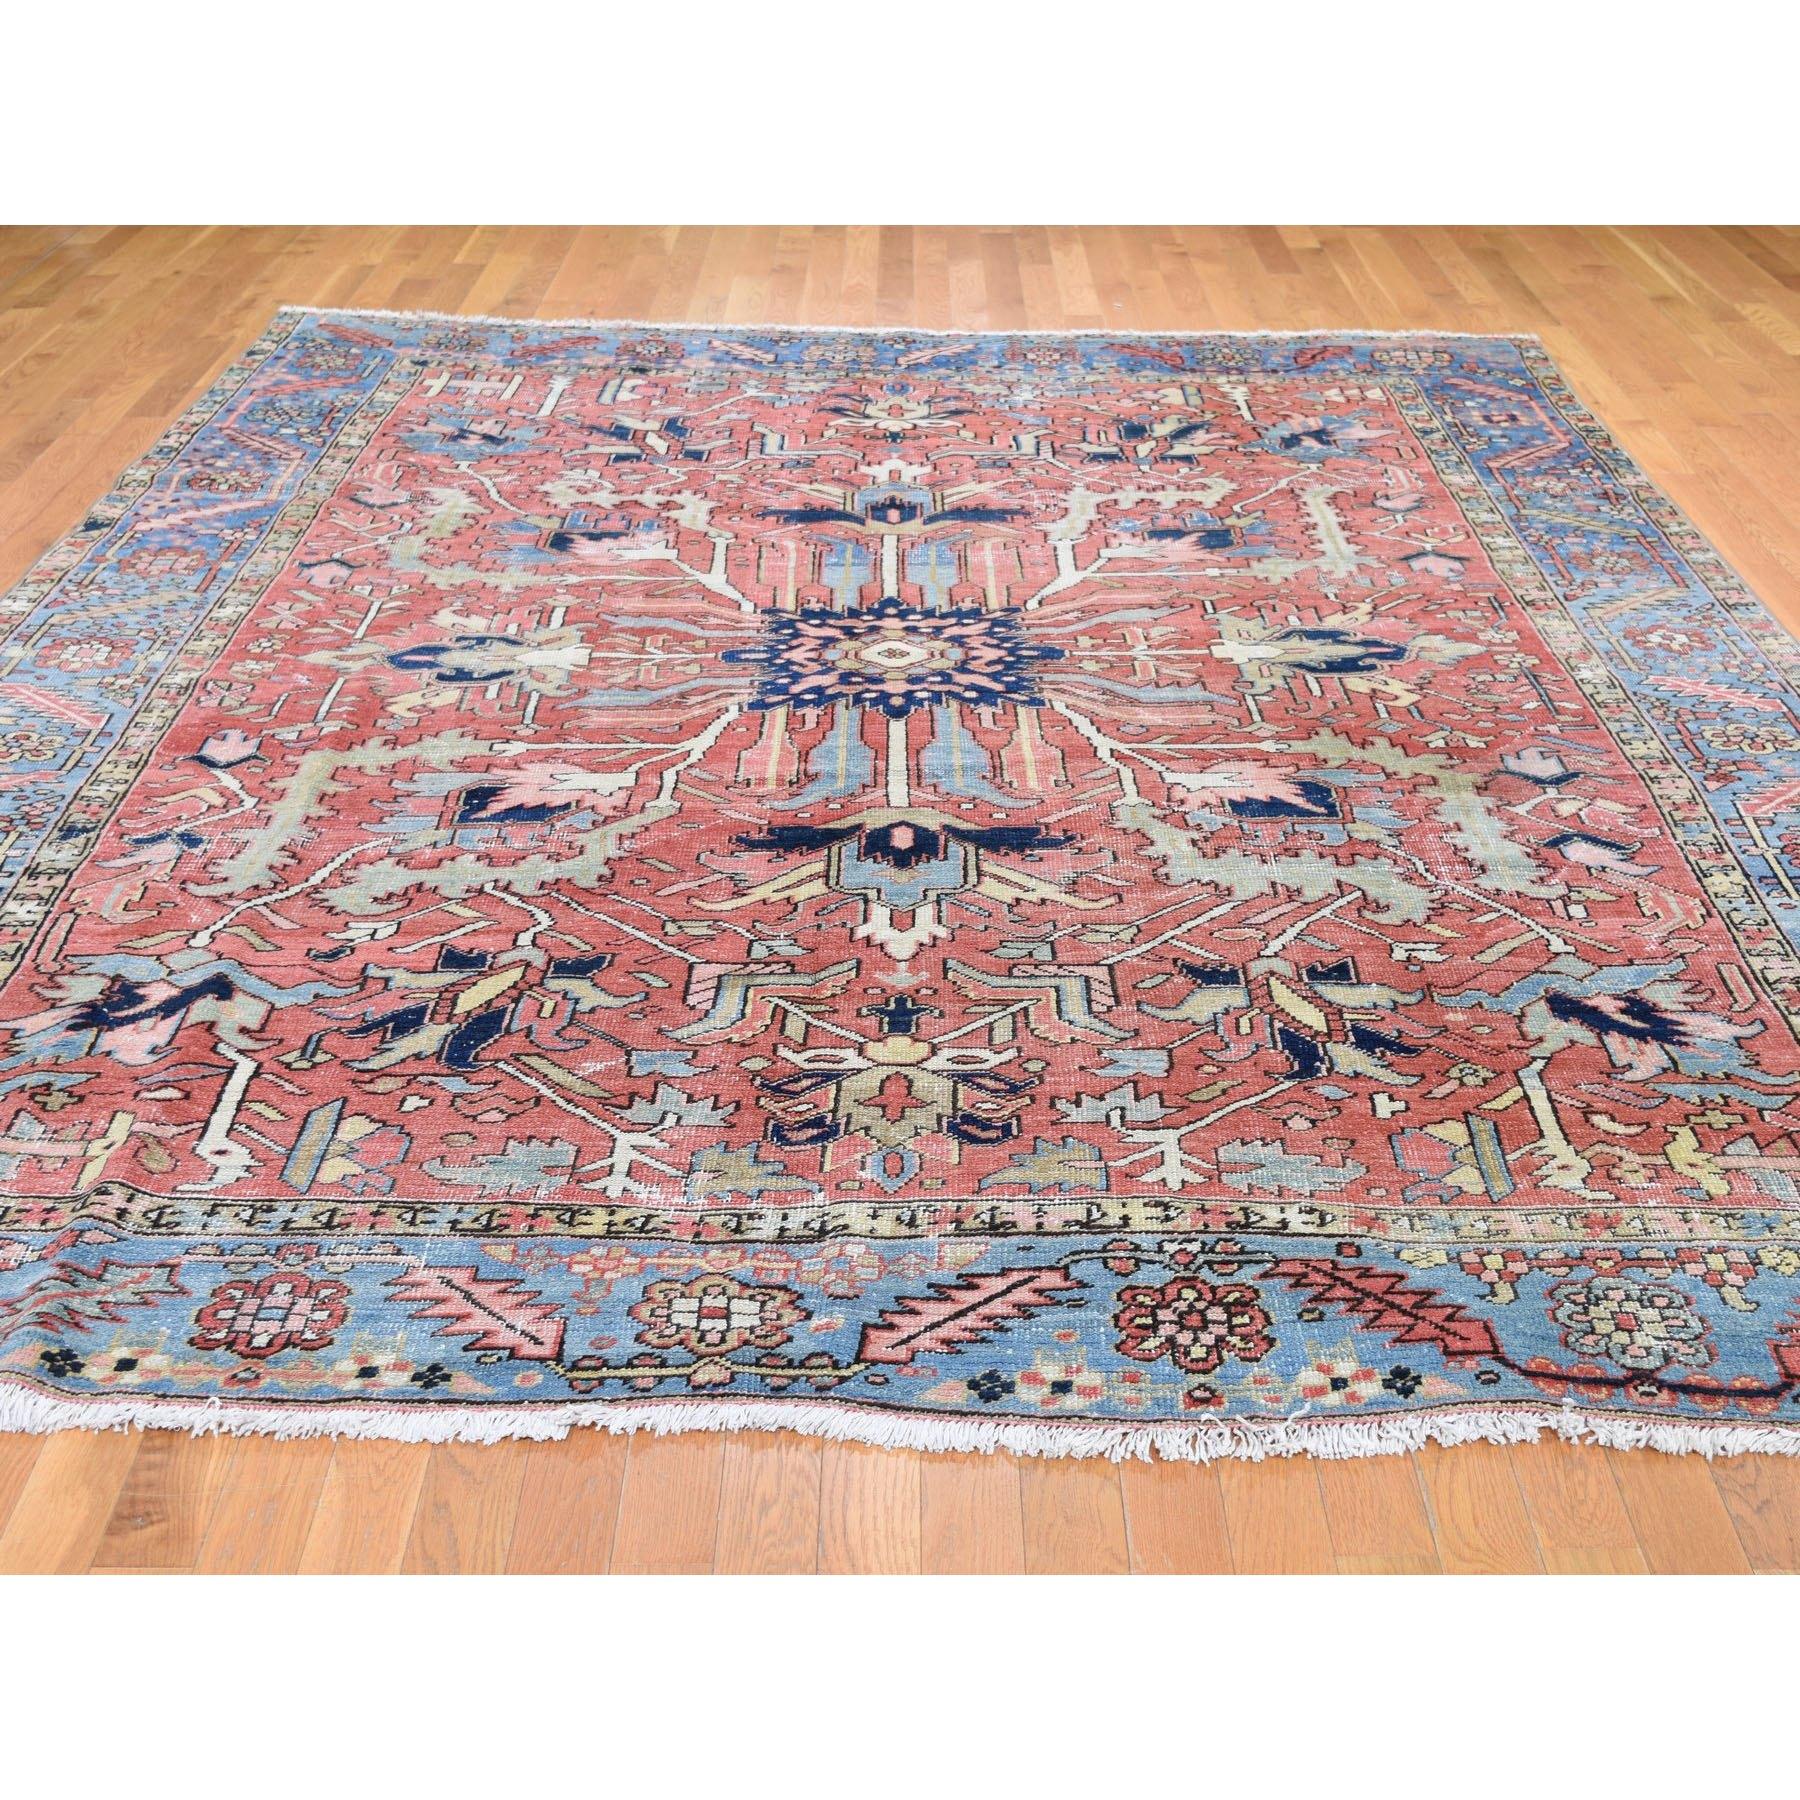 Heriz Serapi Red Antique Persian Heriz Some Wear Clean Hand Knotted Oriental Rug